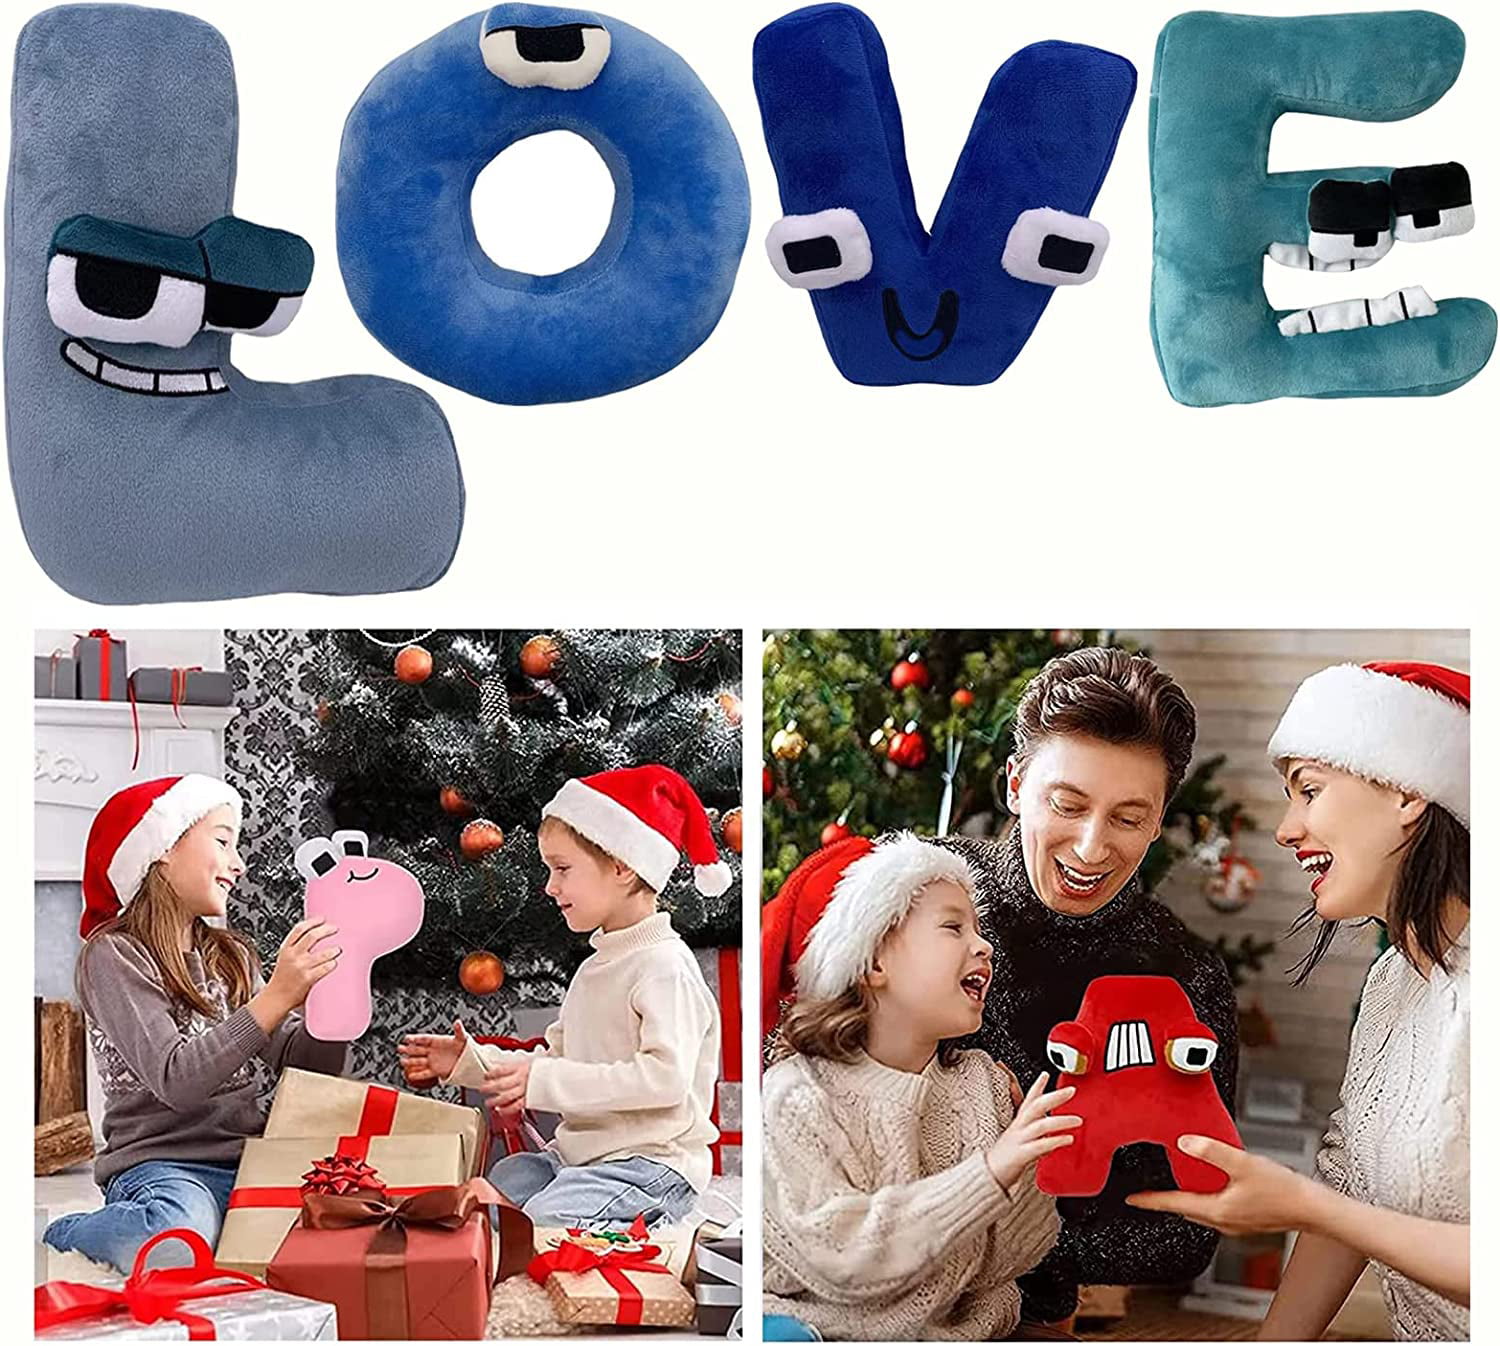 HCXIN Alphabet Lore Plush Toys F, Soft Pillow Decoration of Stuffed Animal  Plush Toys, Suitable for Christmas Valentine's Fans Birthday Gifts 